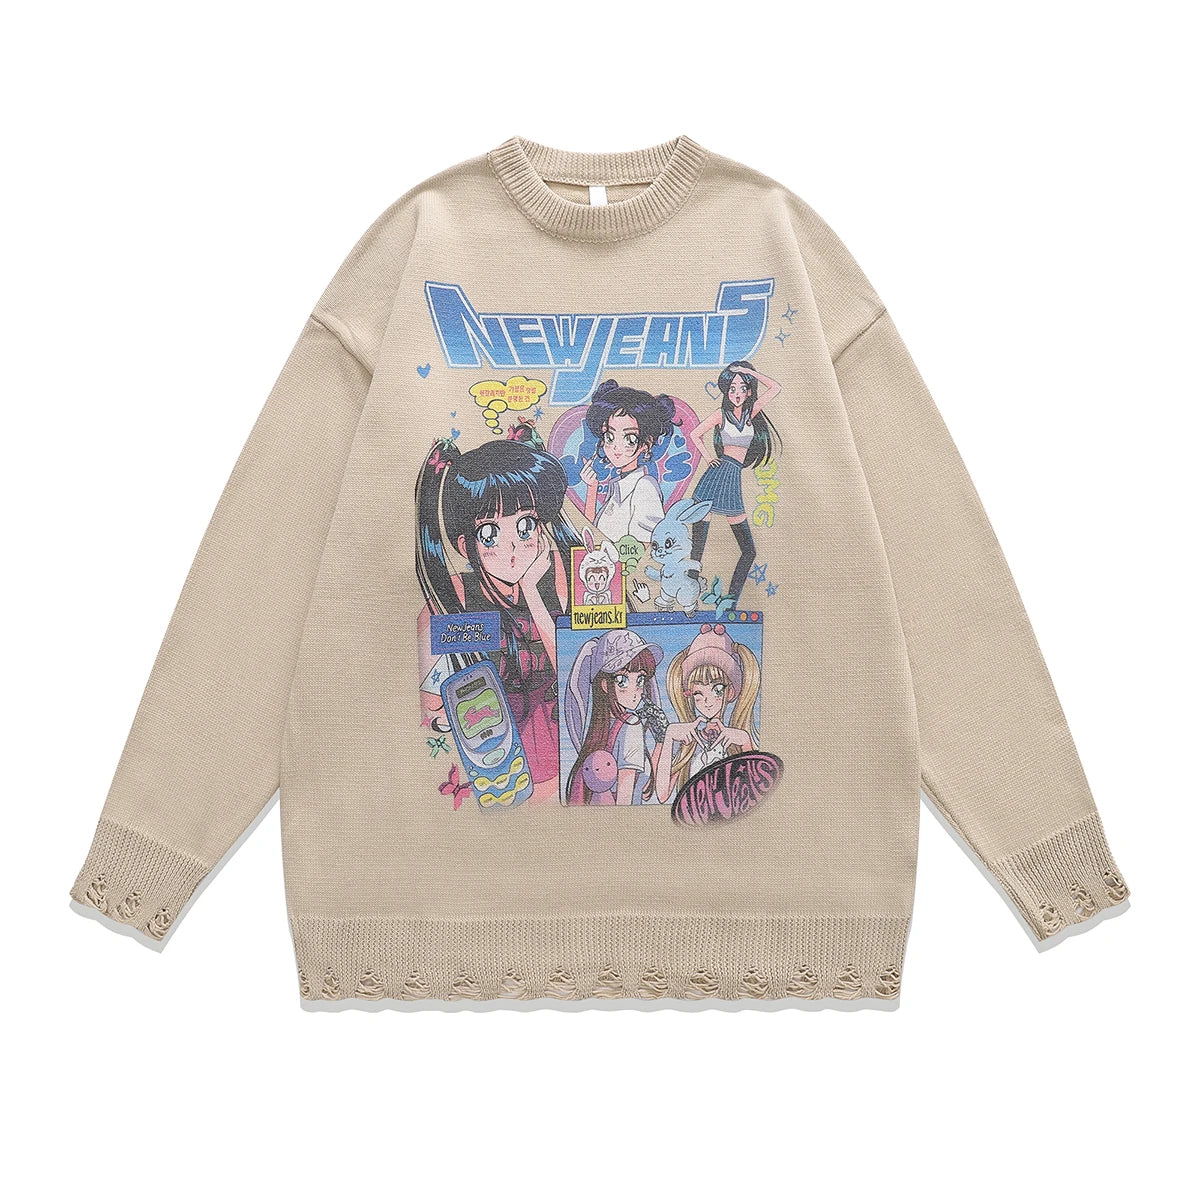 Anime New Jeans Sweater Apricot